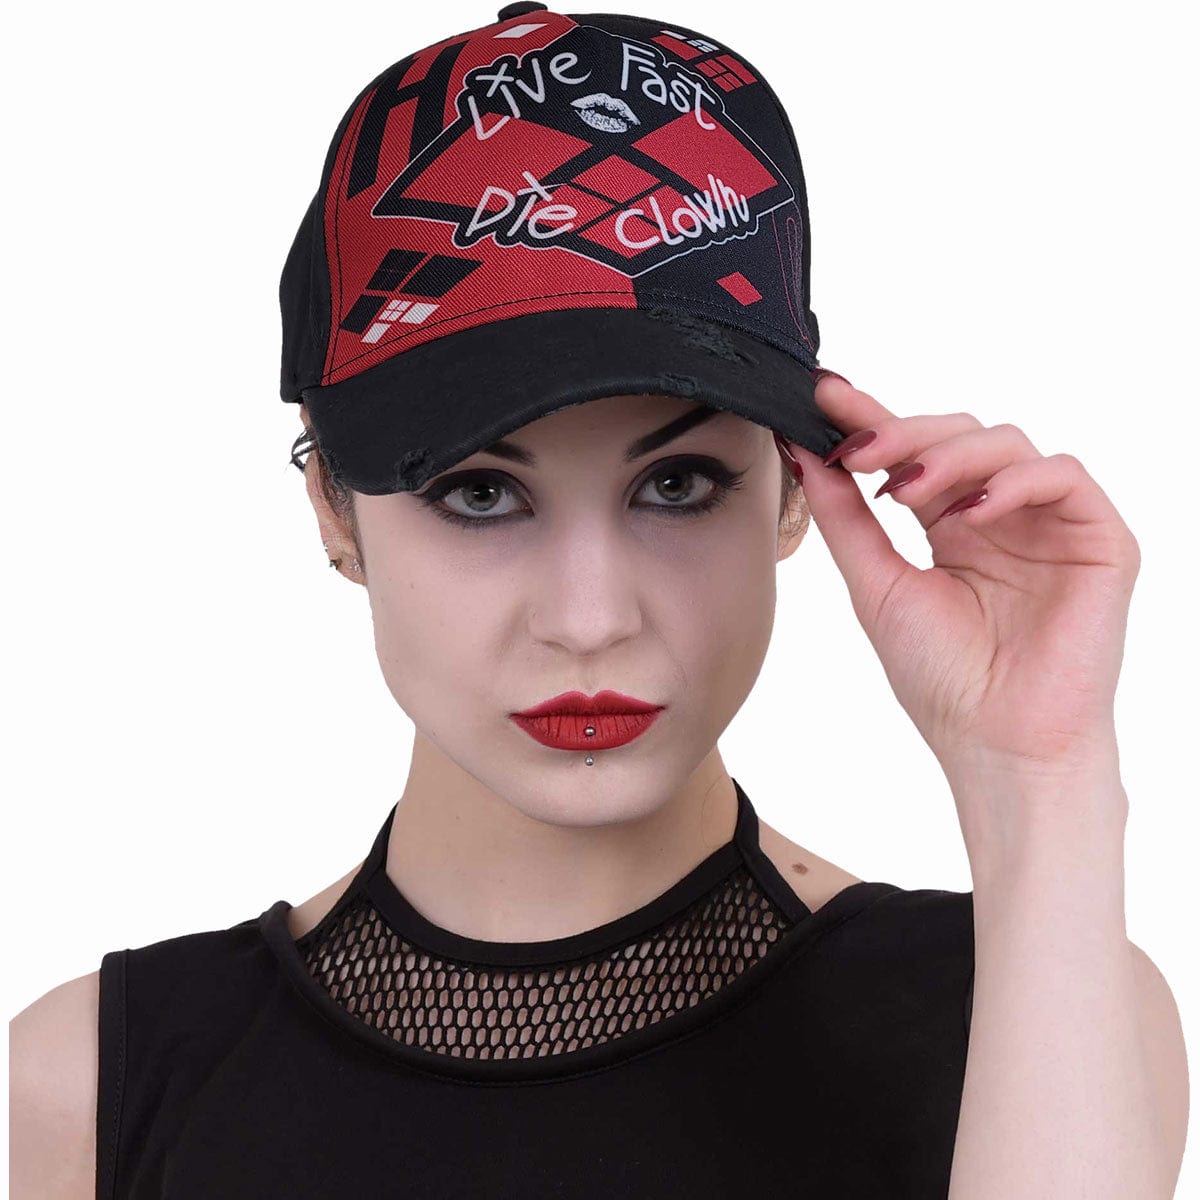 HARLEY QUINN - DIE CLOWN - Baseball Caps Distressed with Metal Clasp - Spiral USA